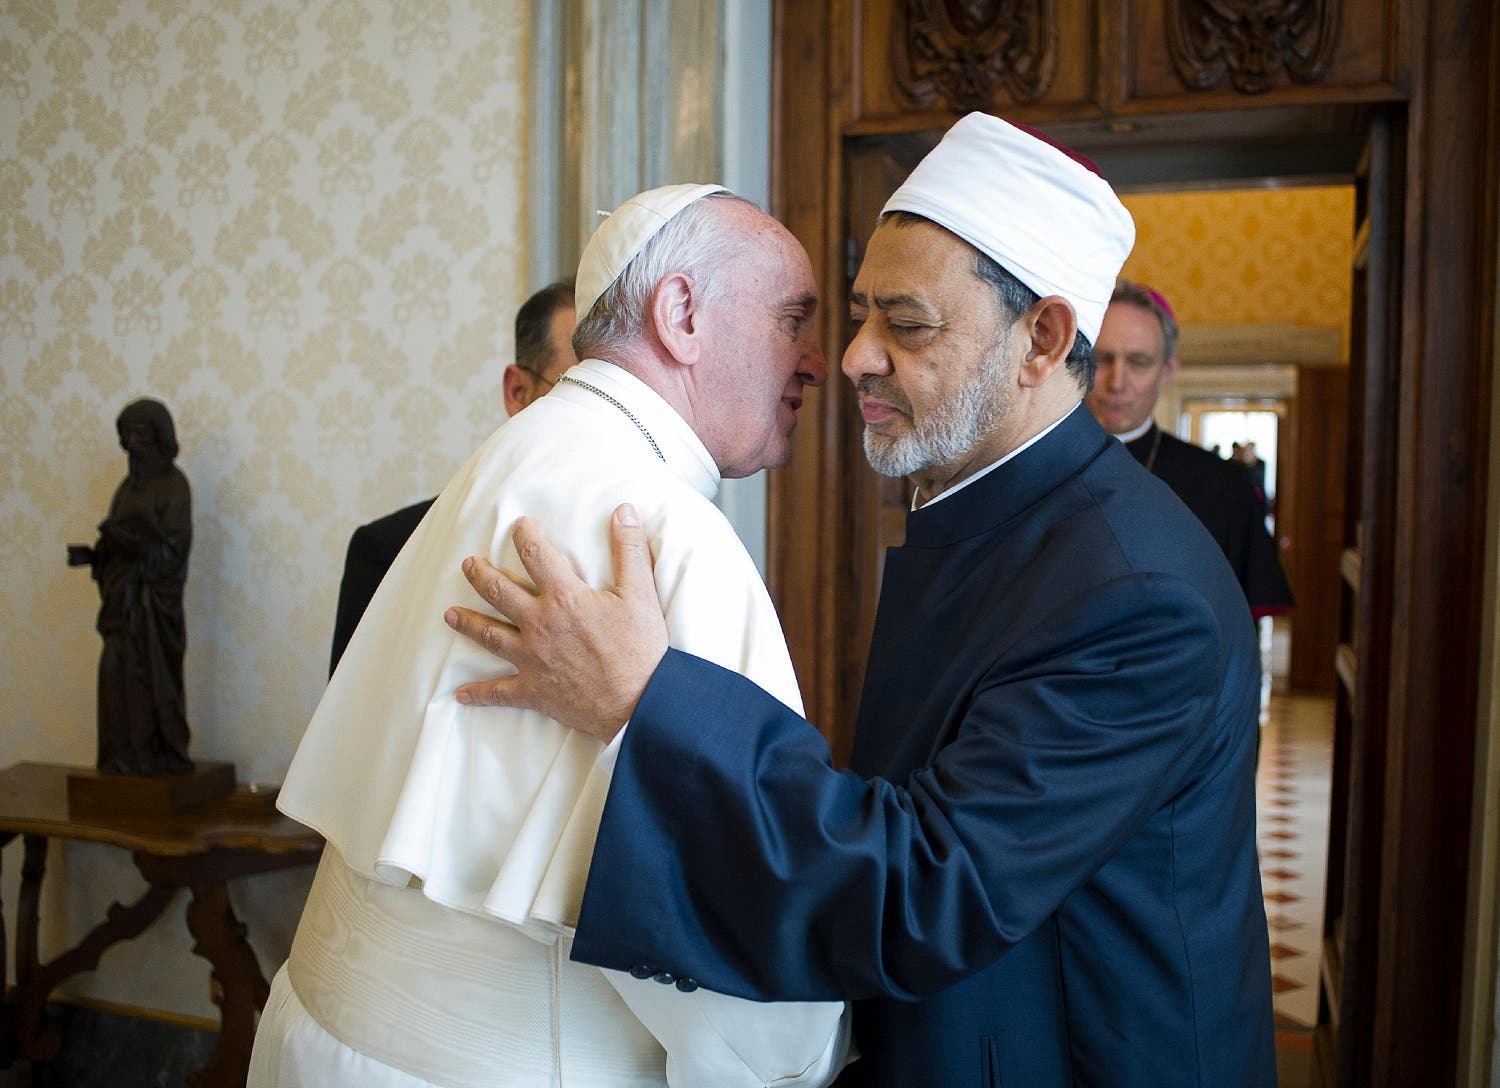 This file handout photo released by the Vatican press office on May 23, 2016 shows Pope Francis (L) embracing Egyptian Grand Imam of al-Azhar Mosque Sheikh Ahmed Mohamed al-Tayeb (R), during a private audience at the Vatican.